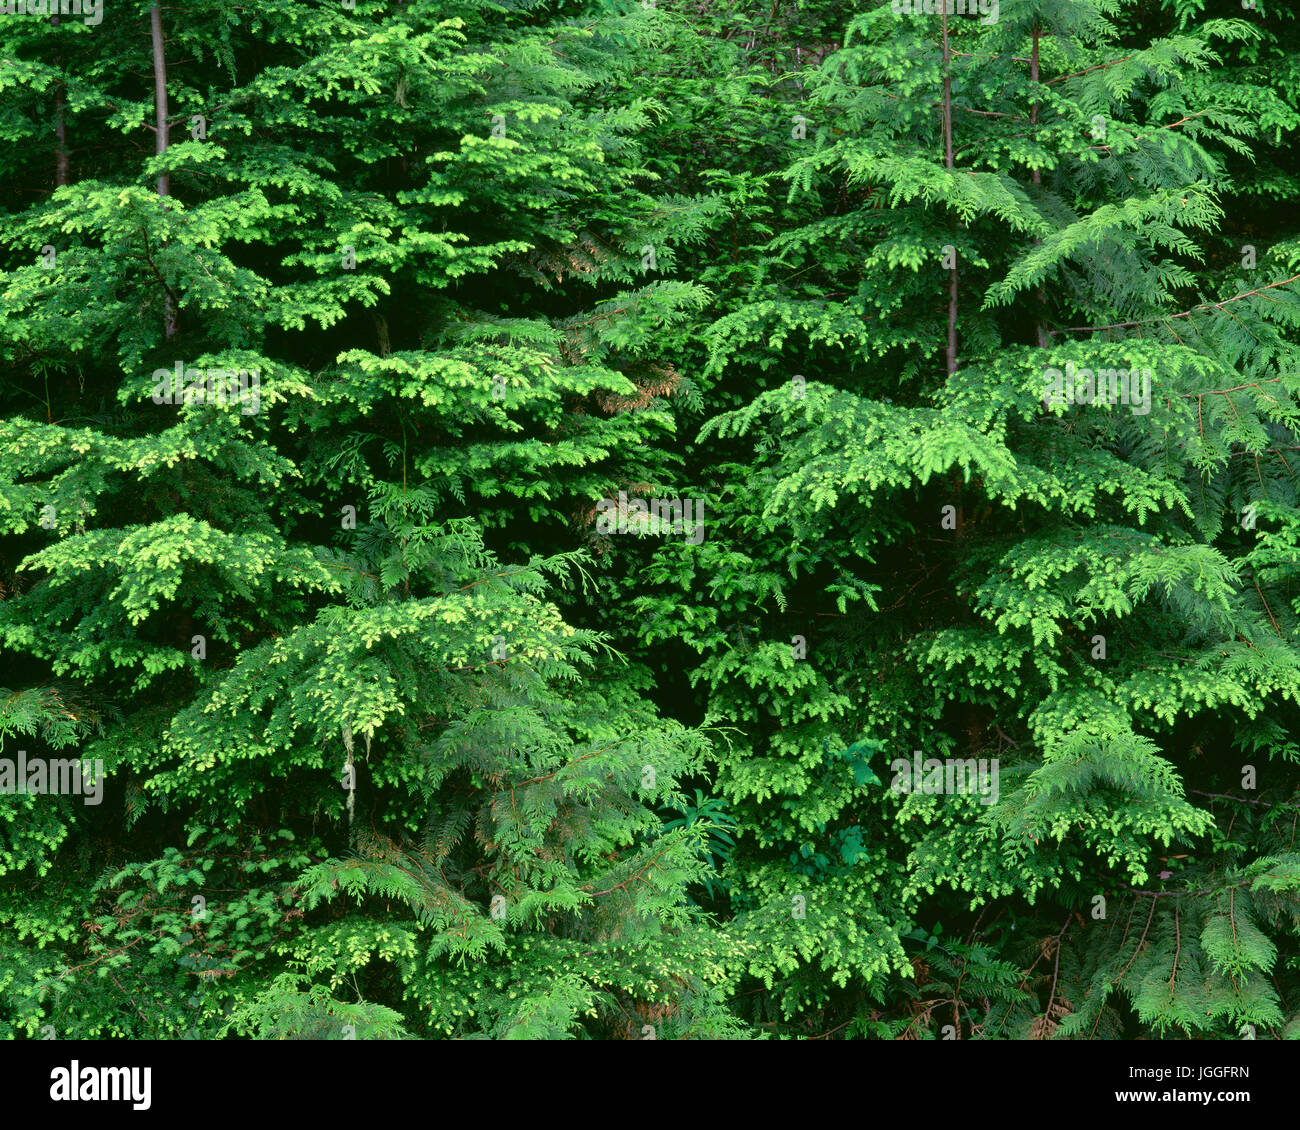 USA, Oregon, Willamette National Forest, Middle Santiam Wilderness, Saplings of western red cedar and western hemlock display new spring growth. Stock Photo